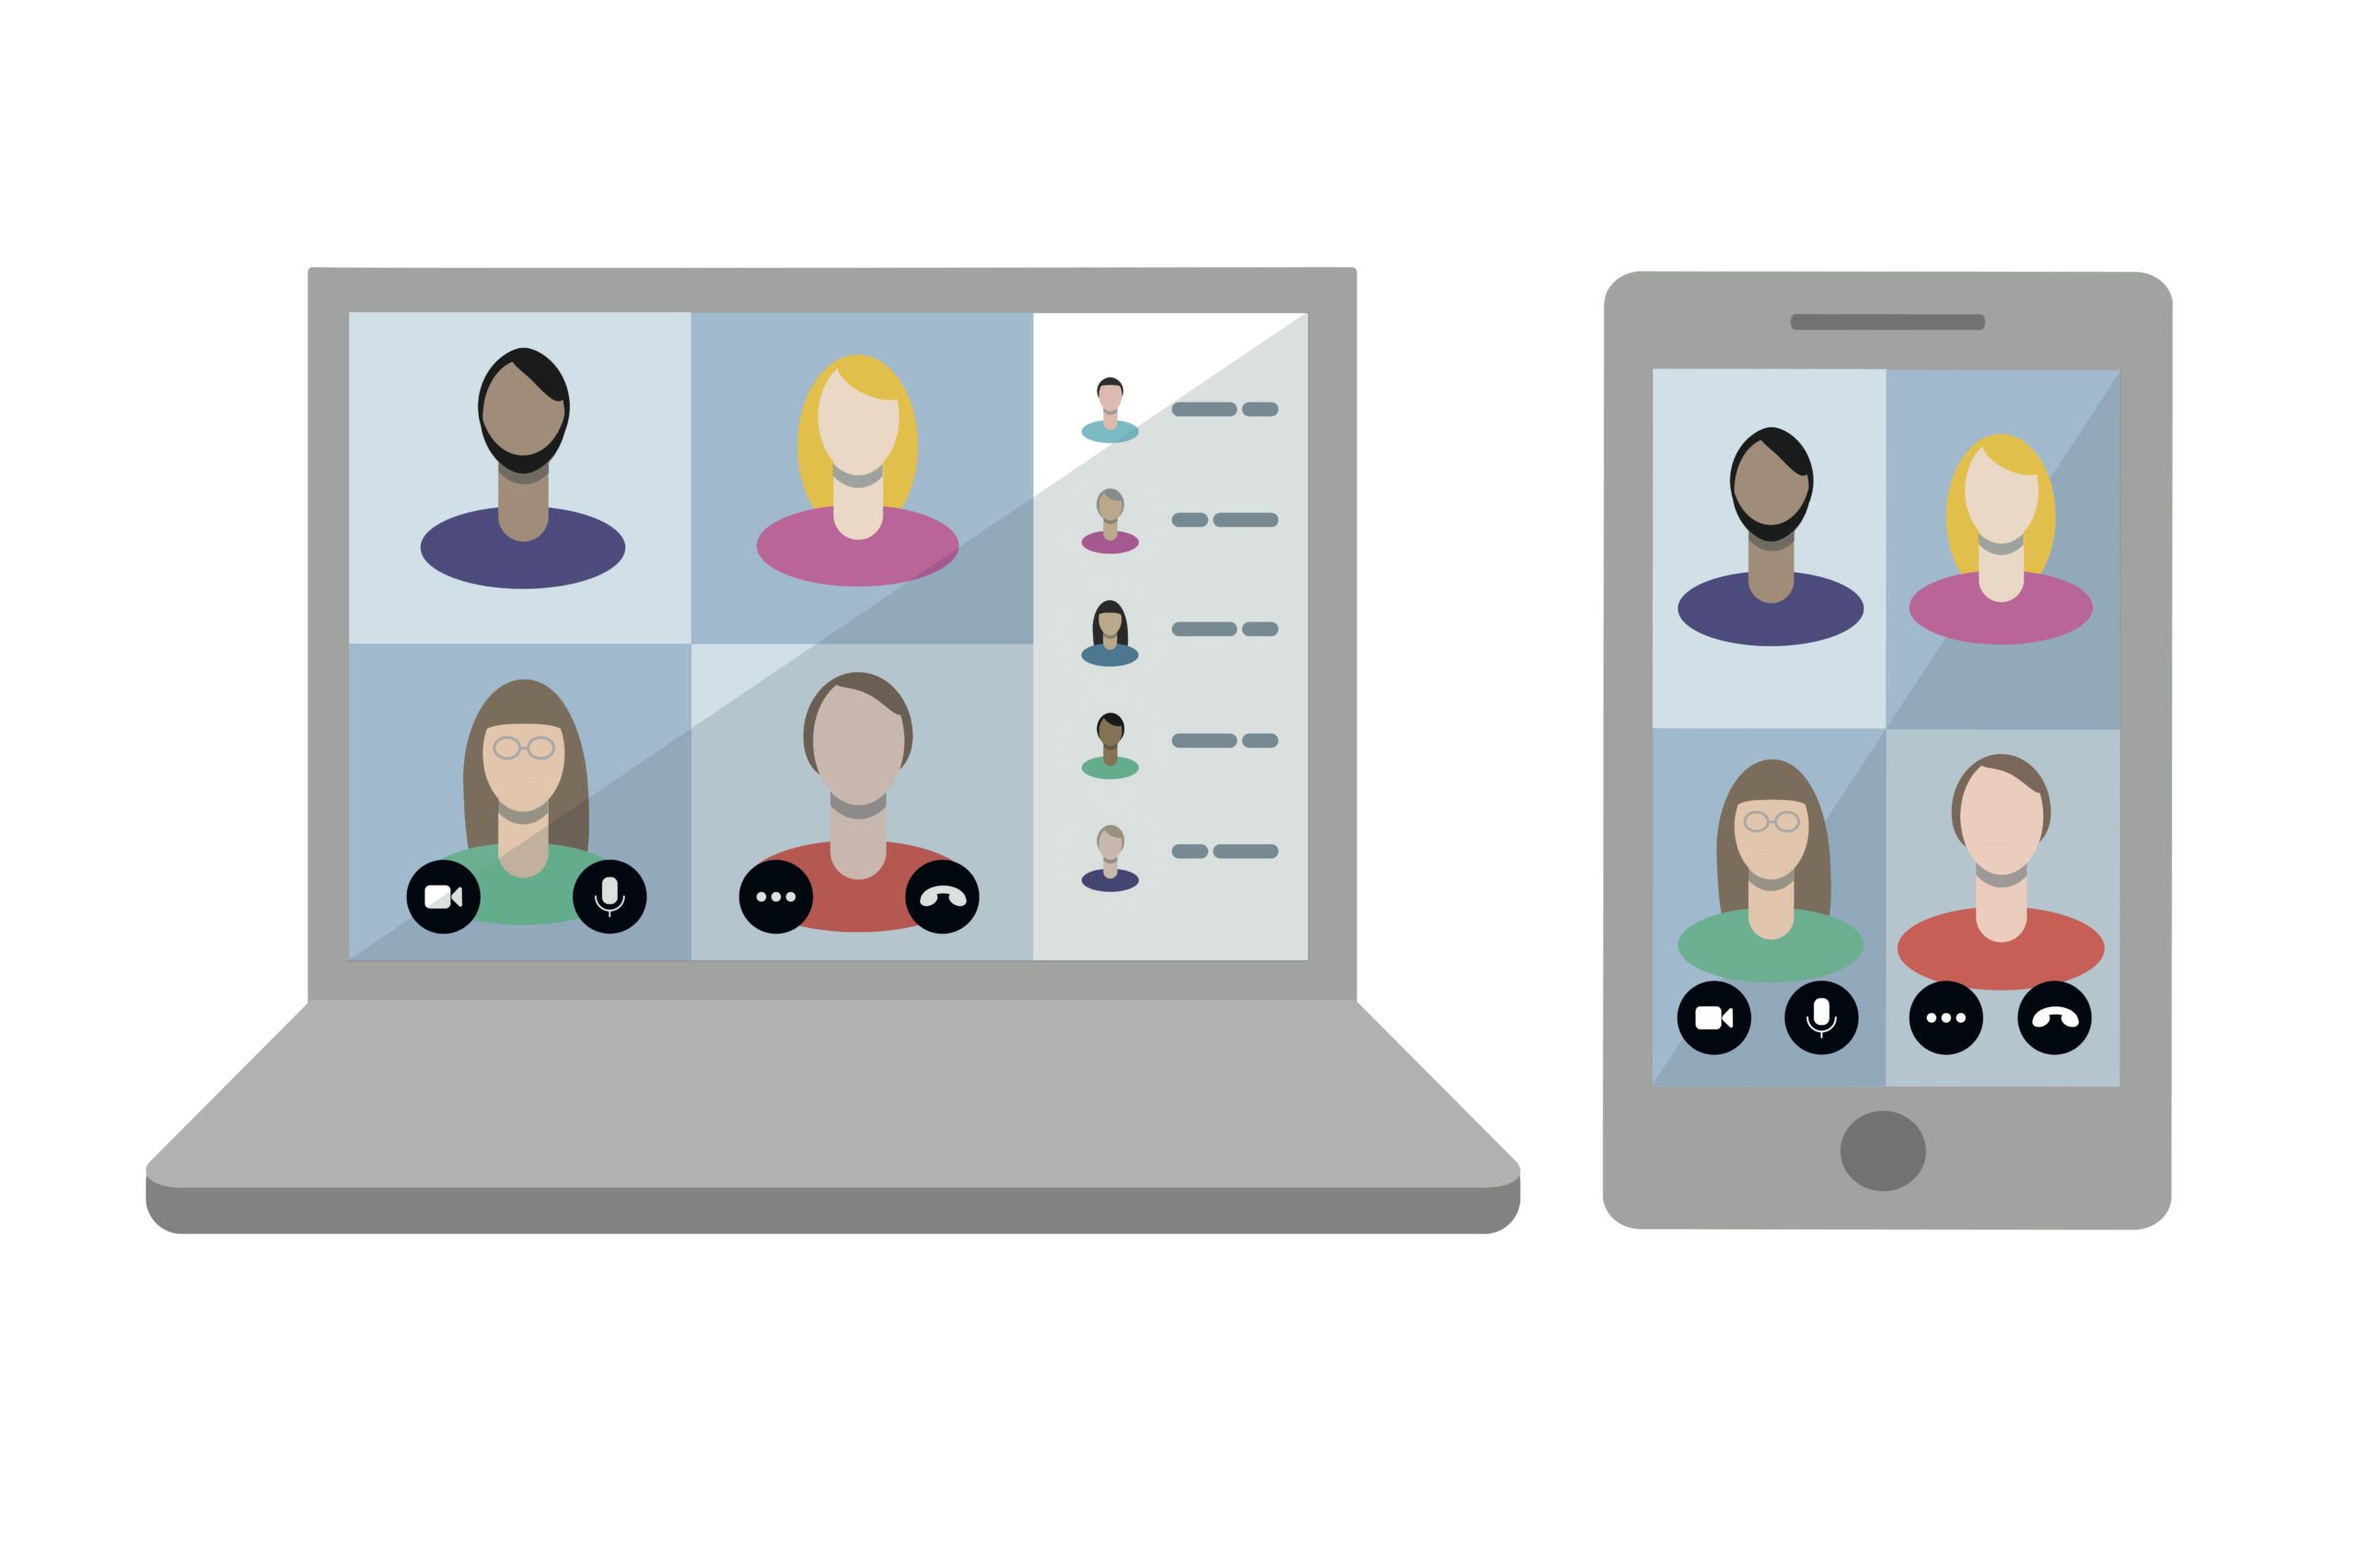 Laptop and mobile phone screen illustrations showing participants in an online meeting for flexible working